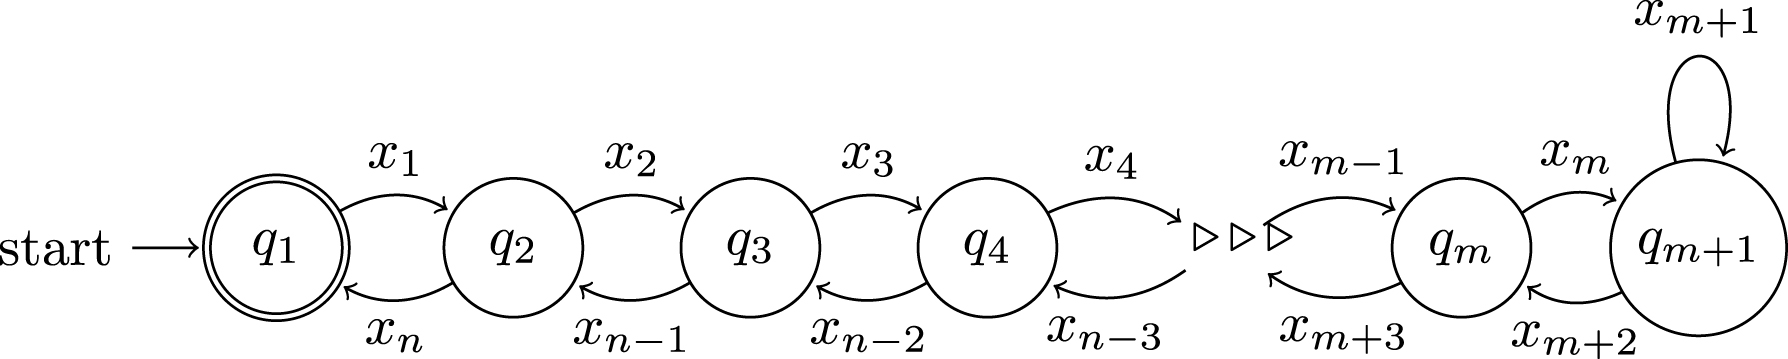 A nondeterministic finite automata that only accepts one string x = x
1
x
2
x
3
x
4 … x

n
 of length n = 2m + 1.